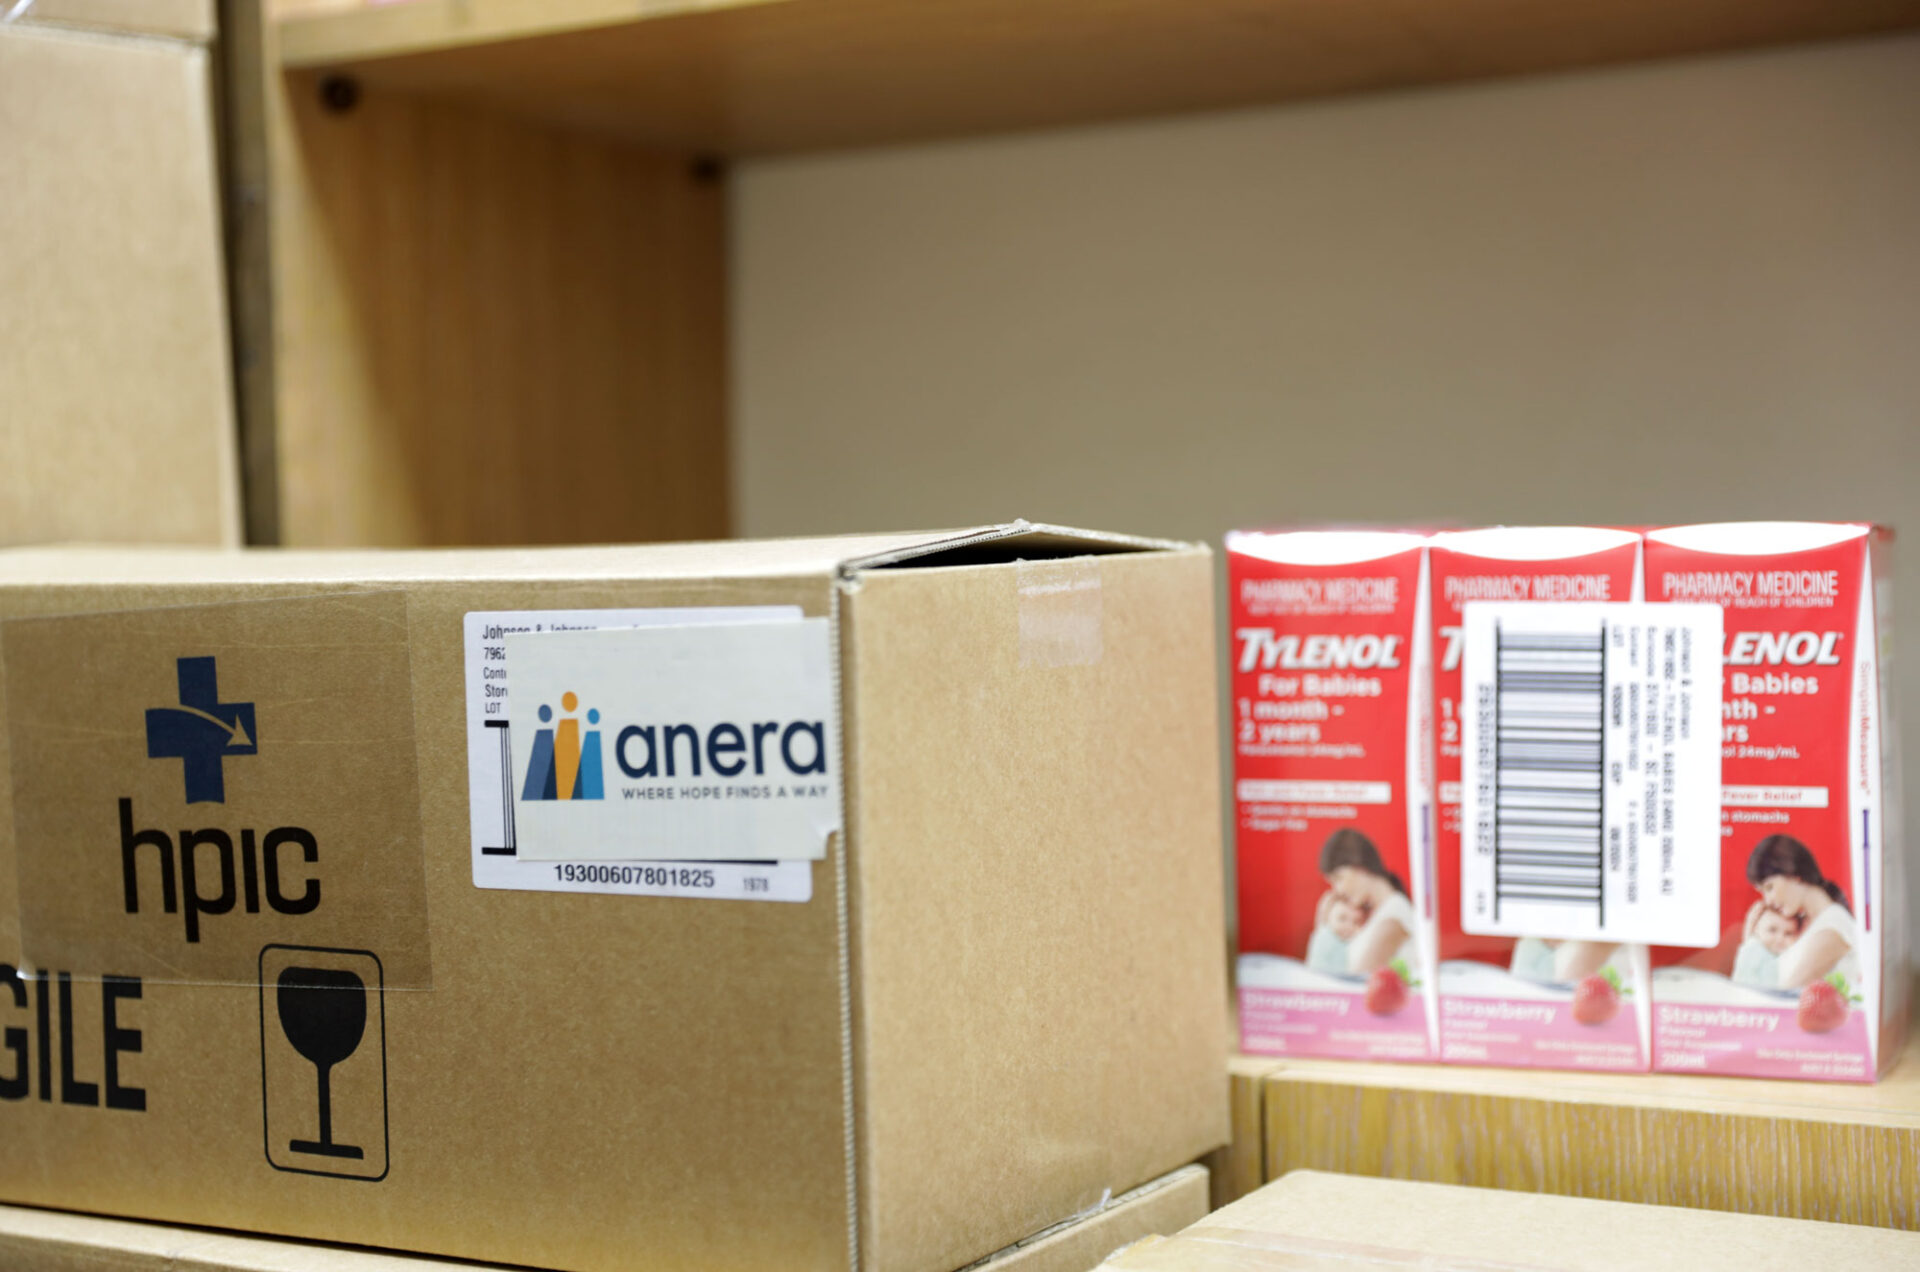 Boxes of pediatric acetaminophen donated by HPIC and distributed by Anera to the Ibn Nafees Center pharmacy.